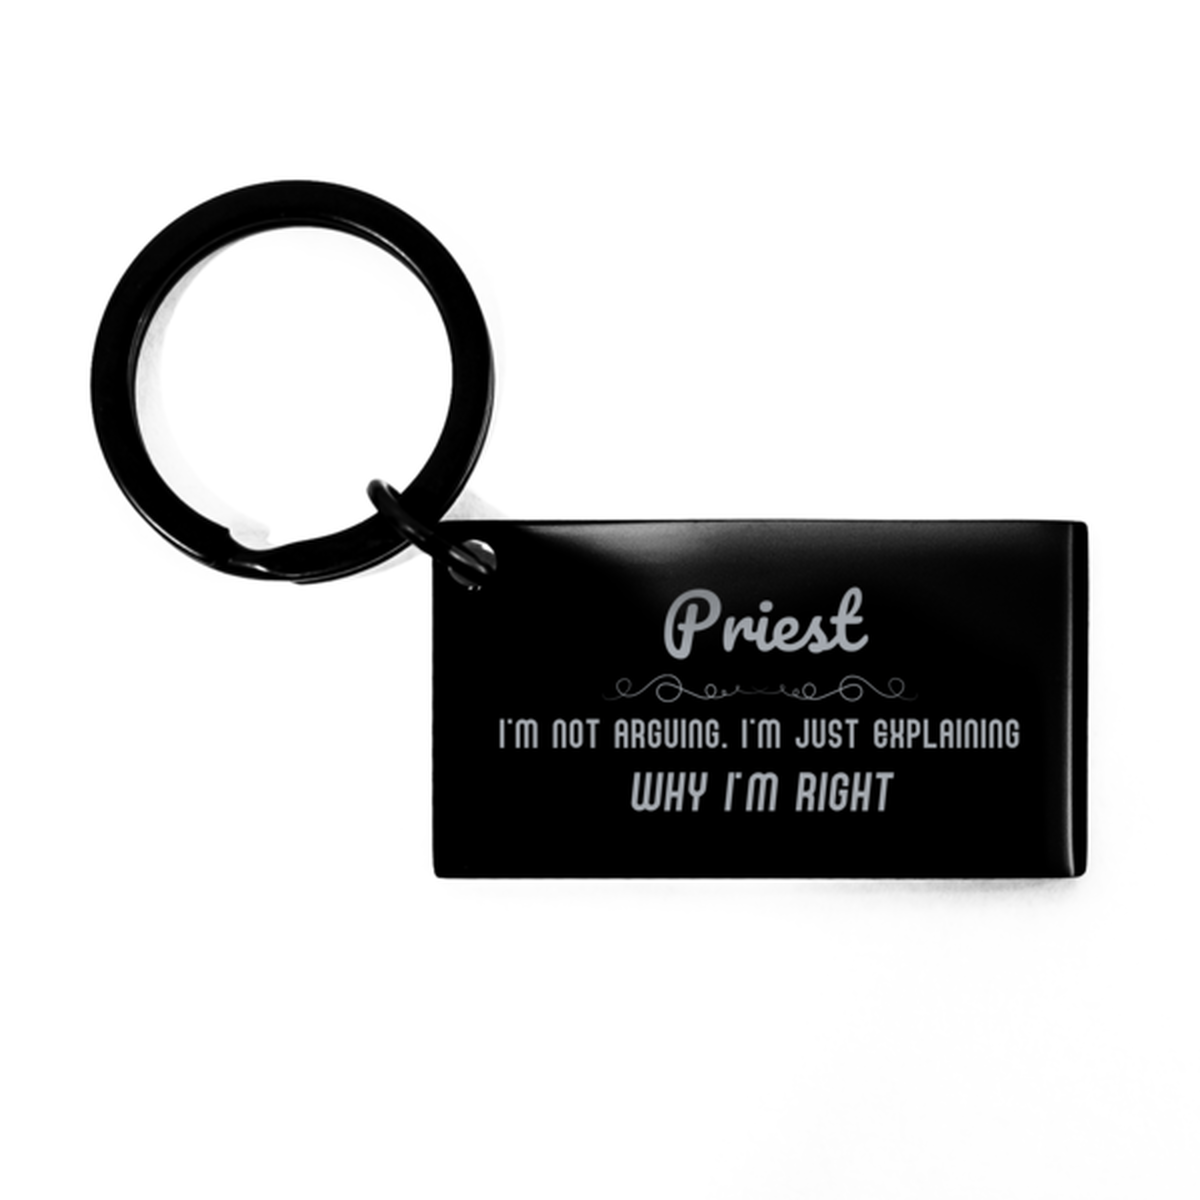 Priest I'm not Arguing. I'm Just Explaining Why I'm RIGHT Keychain, Funny Saying Quote Priest Gifts For Priest Graduation Birthday Christmas Gifts for Men Women Coworker